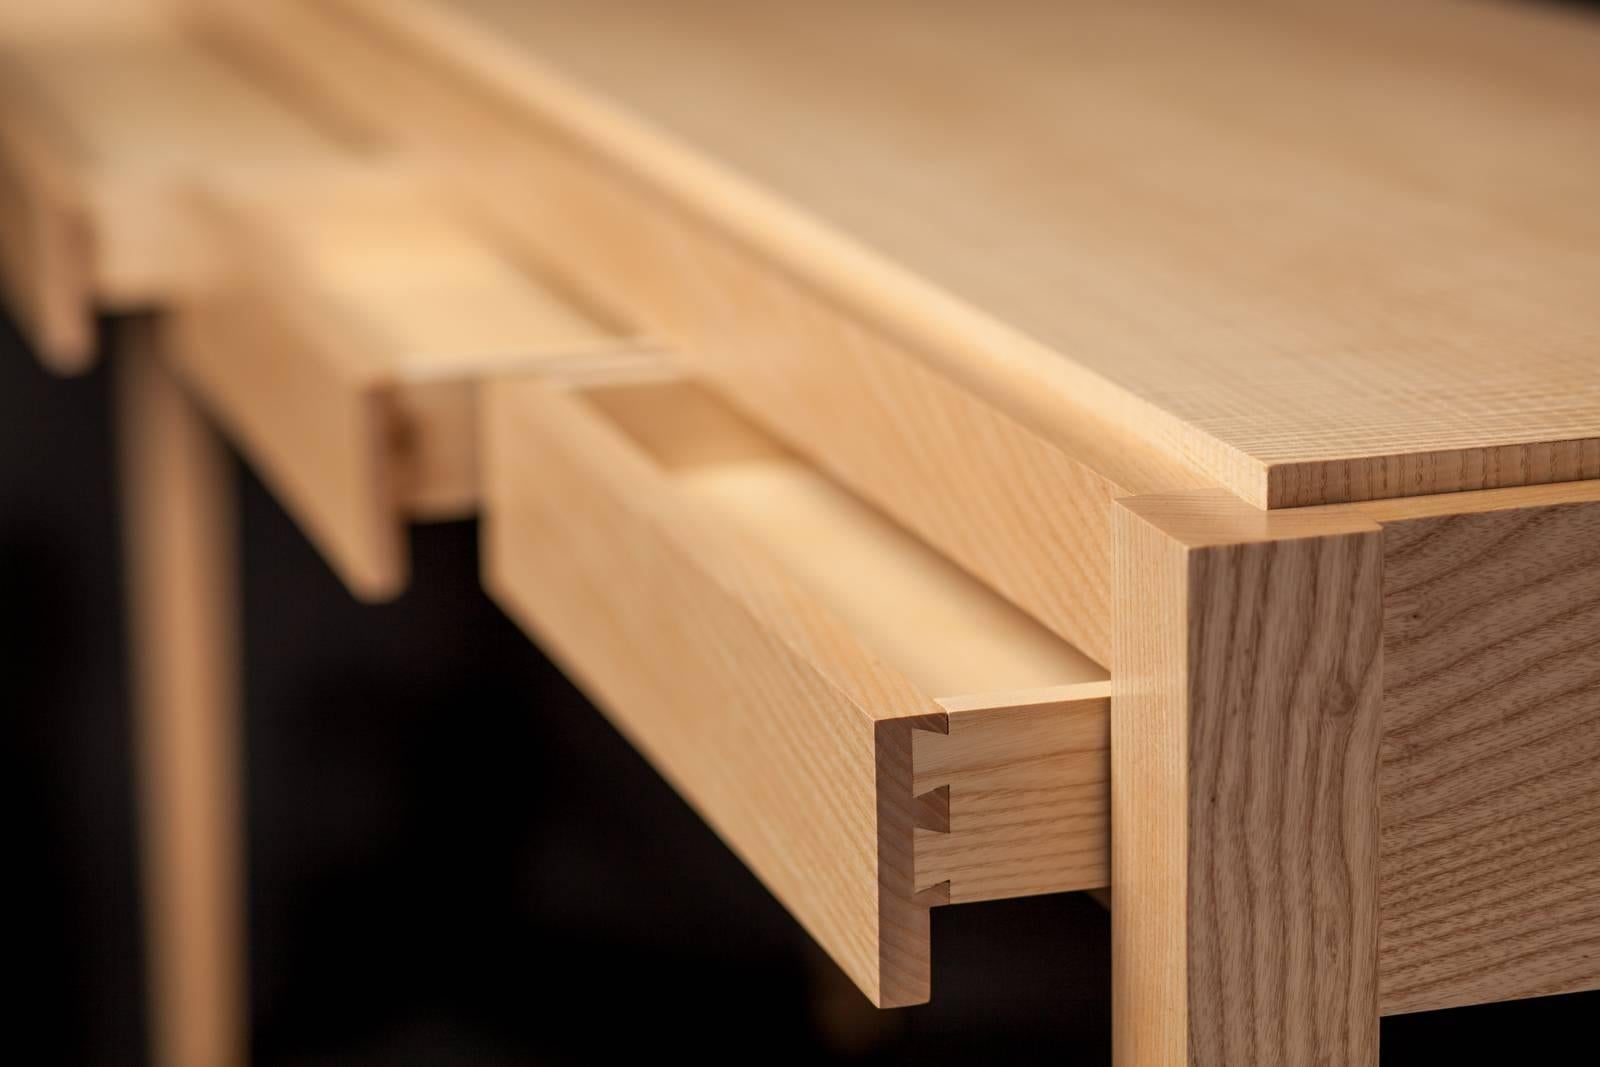 Raised inset top highlights stunning bookmatched figured ash veneers.
Quarter sawn solid white ash grain creates continuous crisp horizontal lines around the console.
Rift sawn solid white ash legs taper to accentuate a light feel.
Dovetail drawer